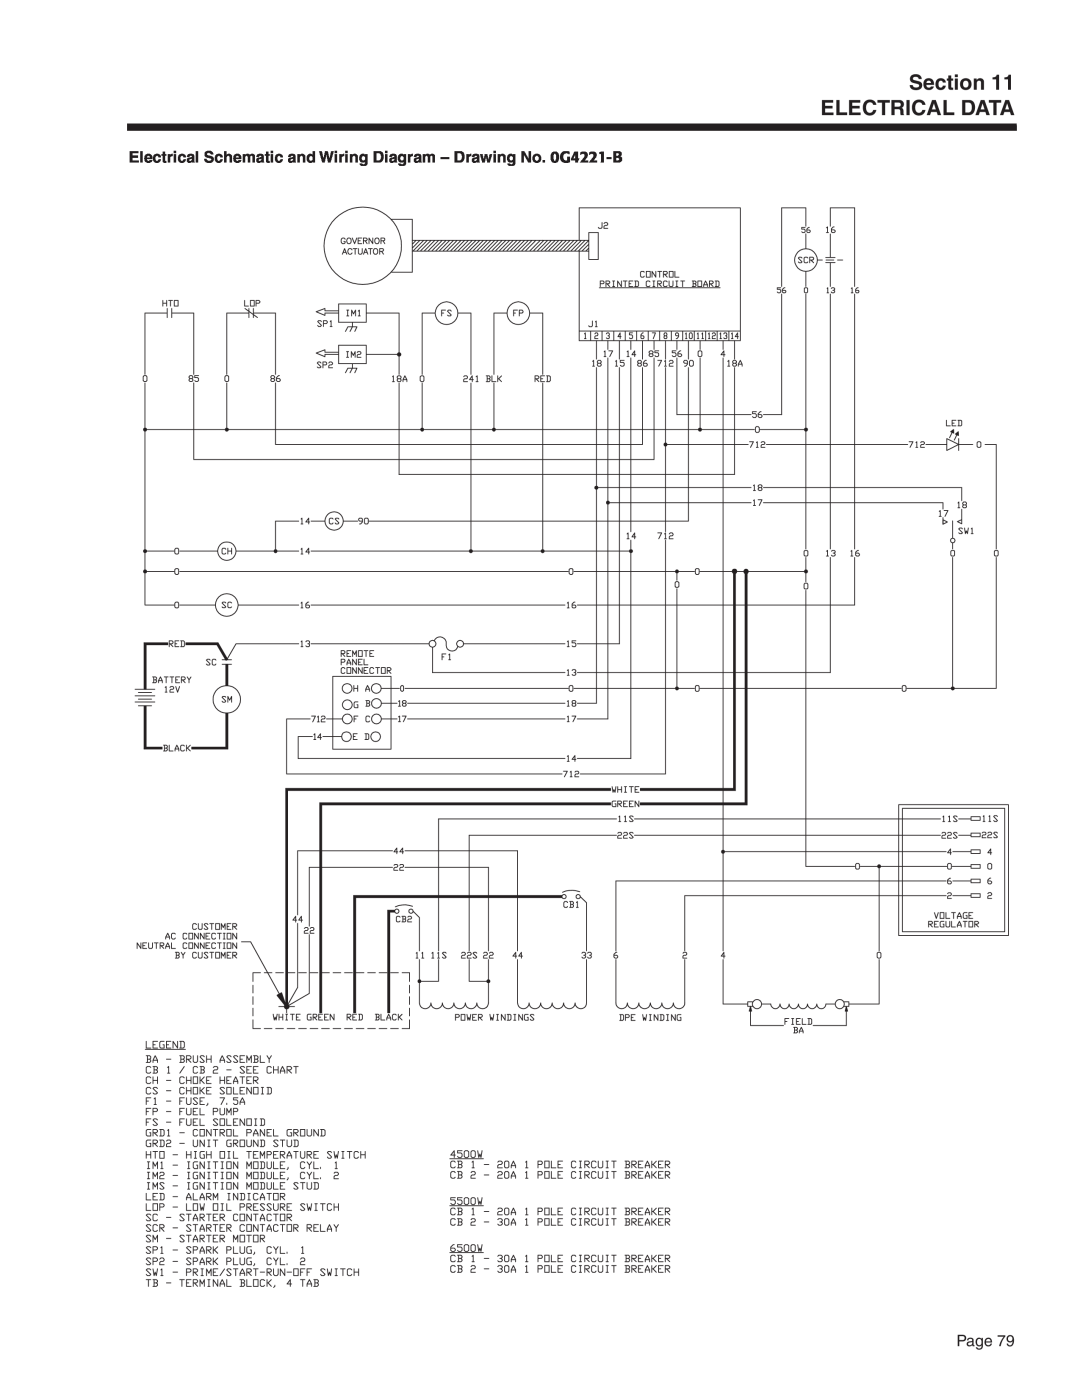 Generac Power Systems 5415, 5412 Section ELECTRICAL DATA, Electrical Schematic and Wiring Diagram - Drawing No. 0G4221-B 